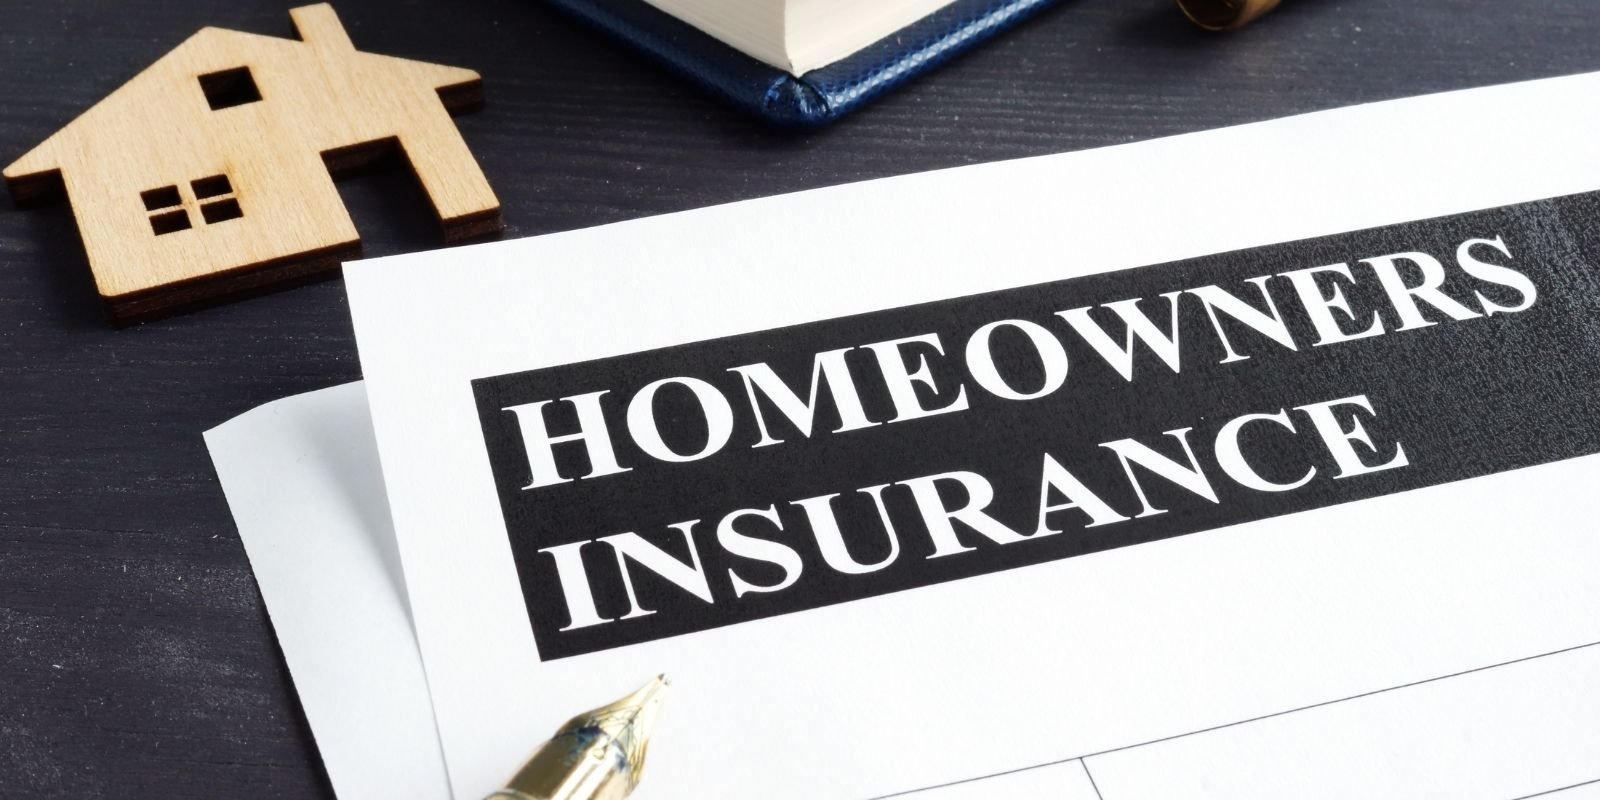 5. Homeowners Insurance Not Secured